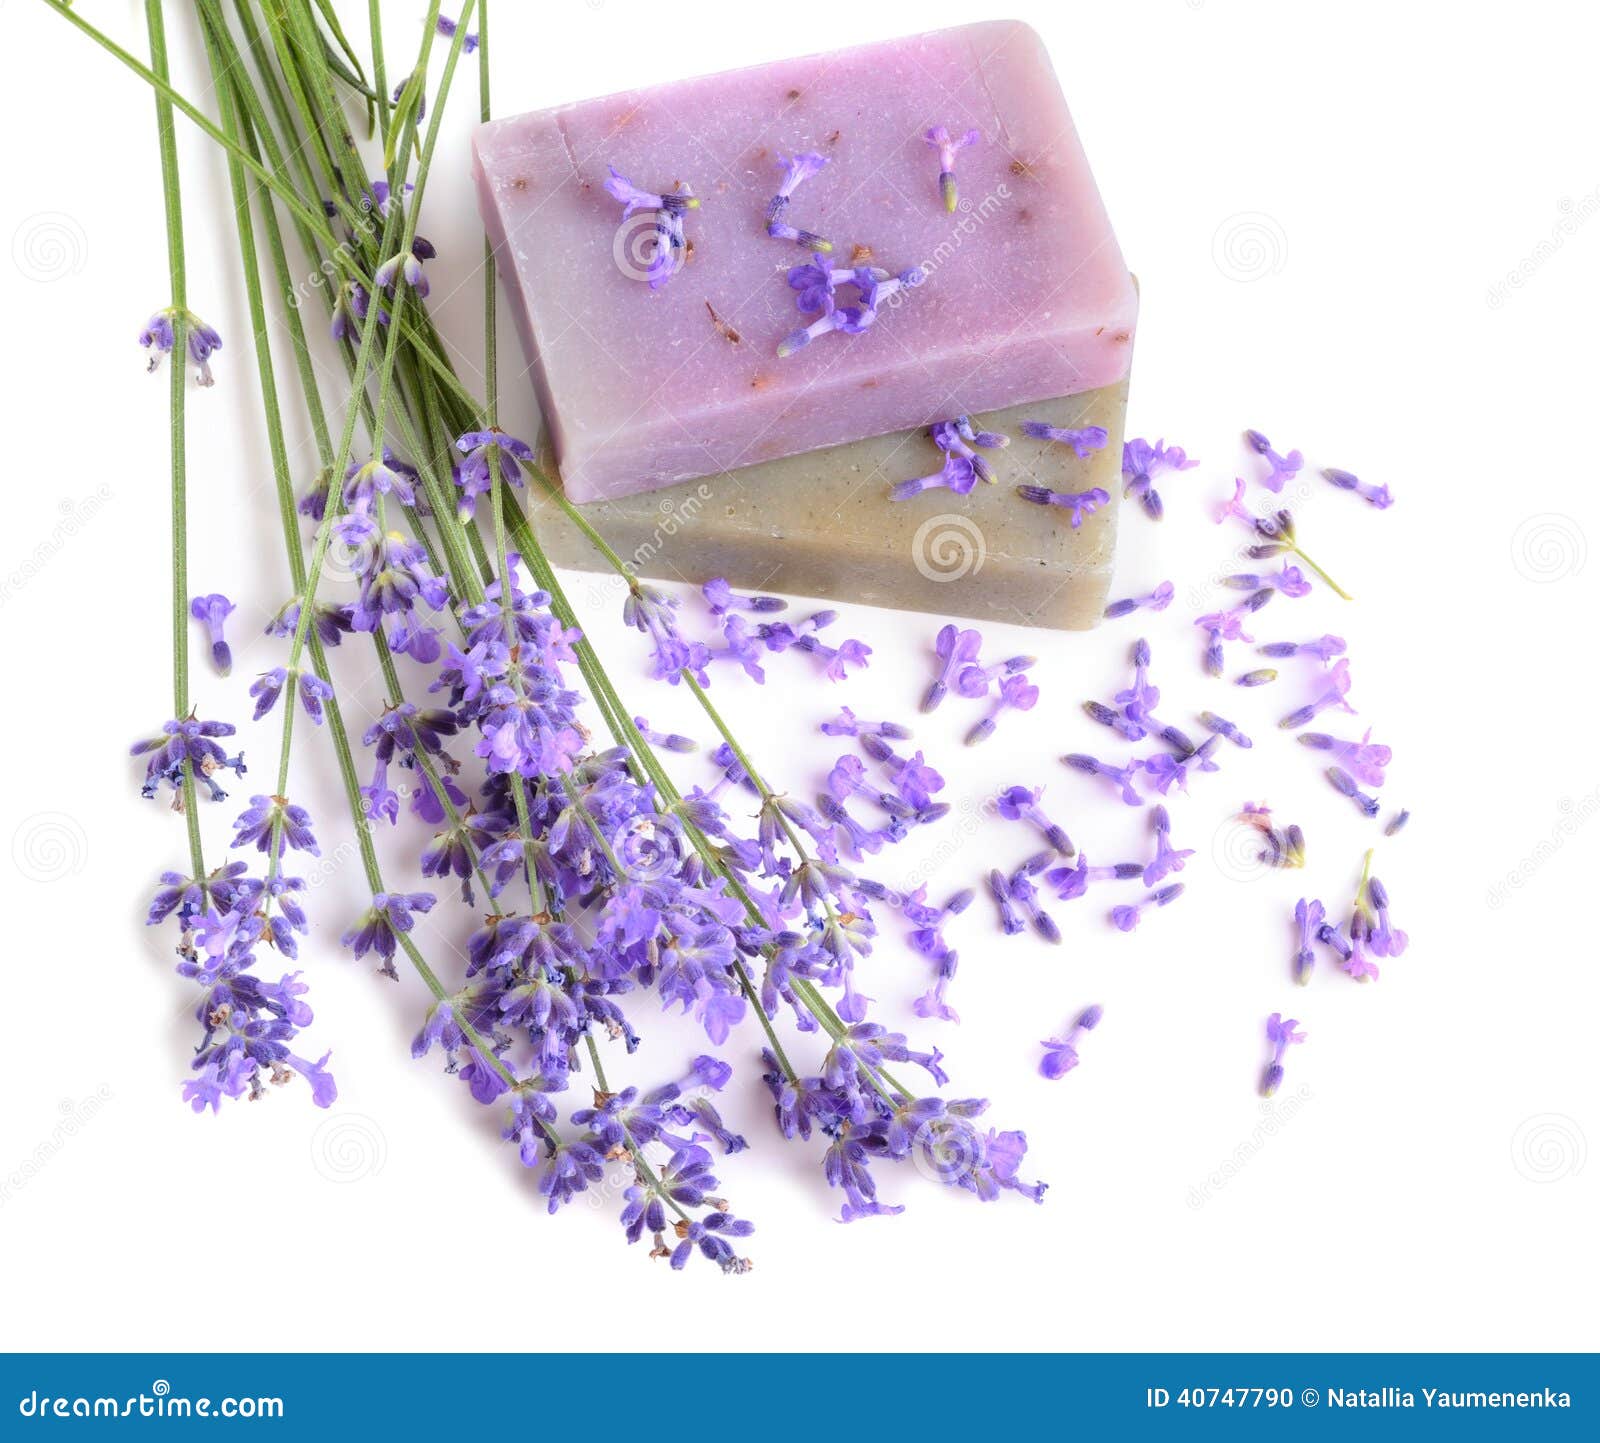 natural soaps for bodycare